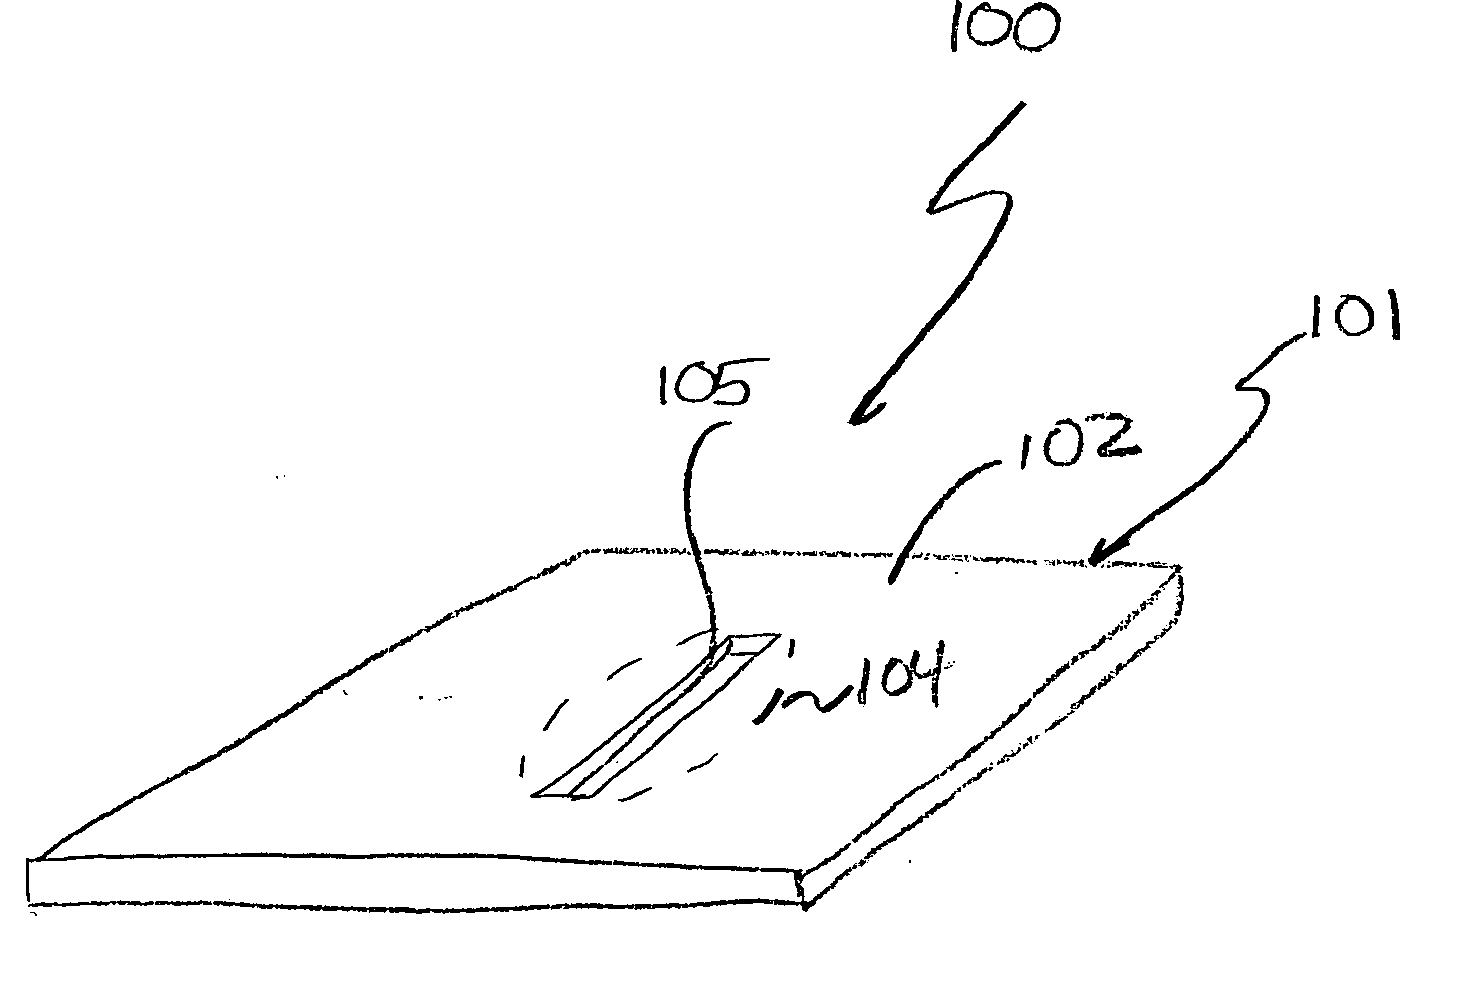 Device and method for closing an opening in a body cavity or lumen